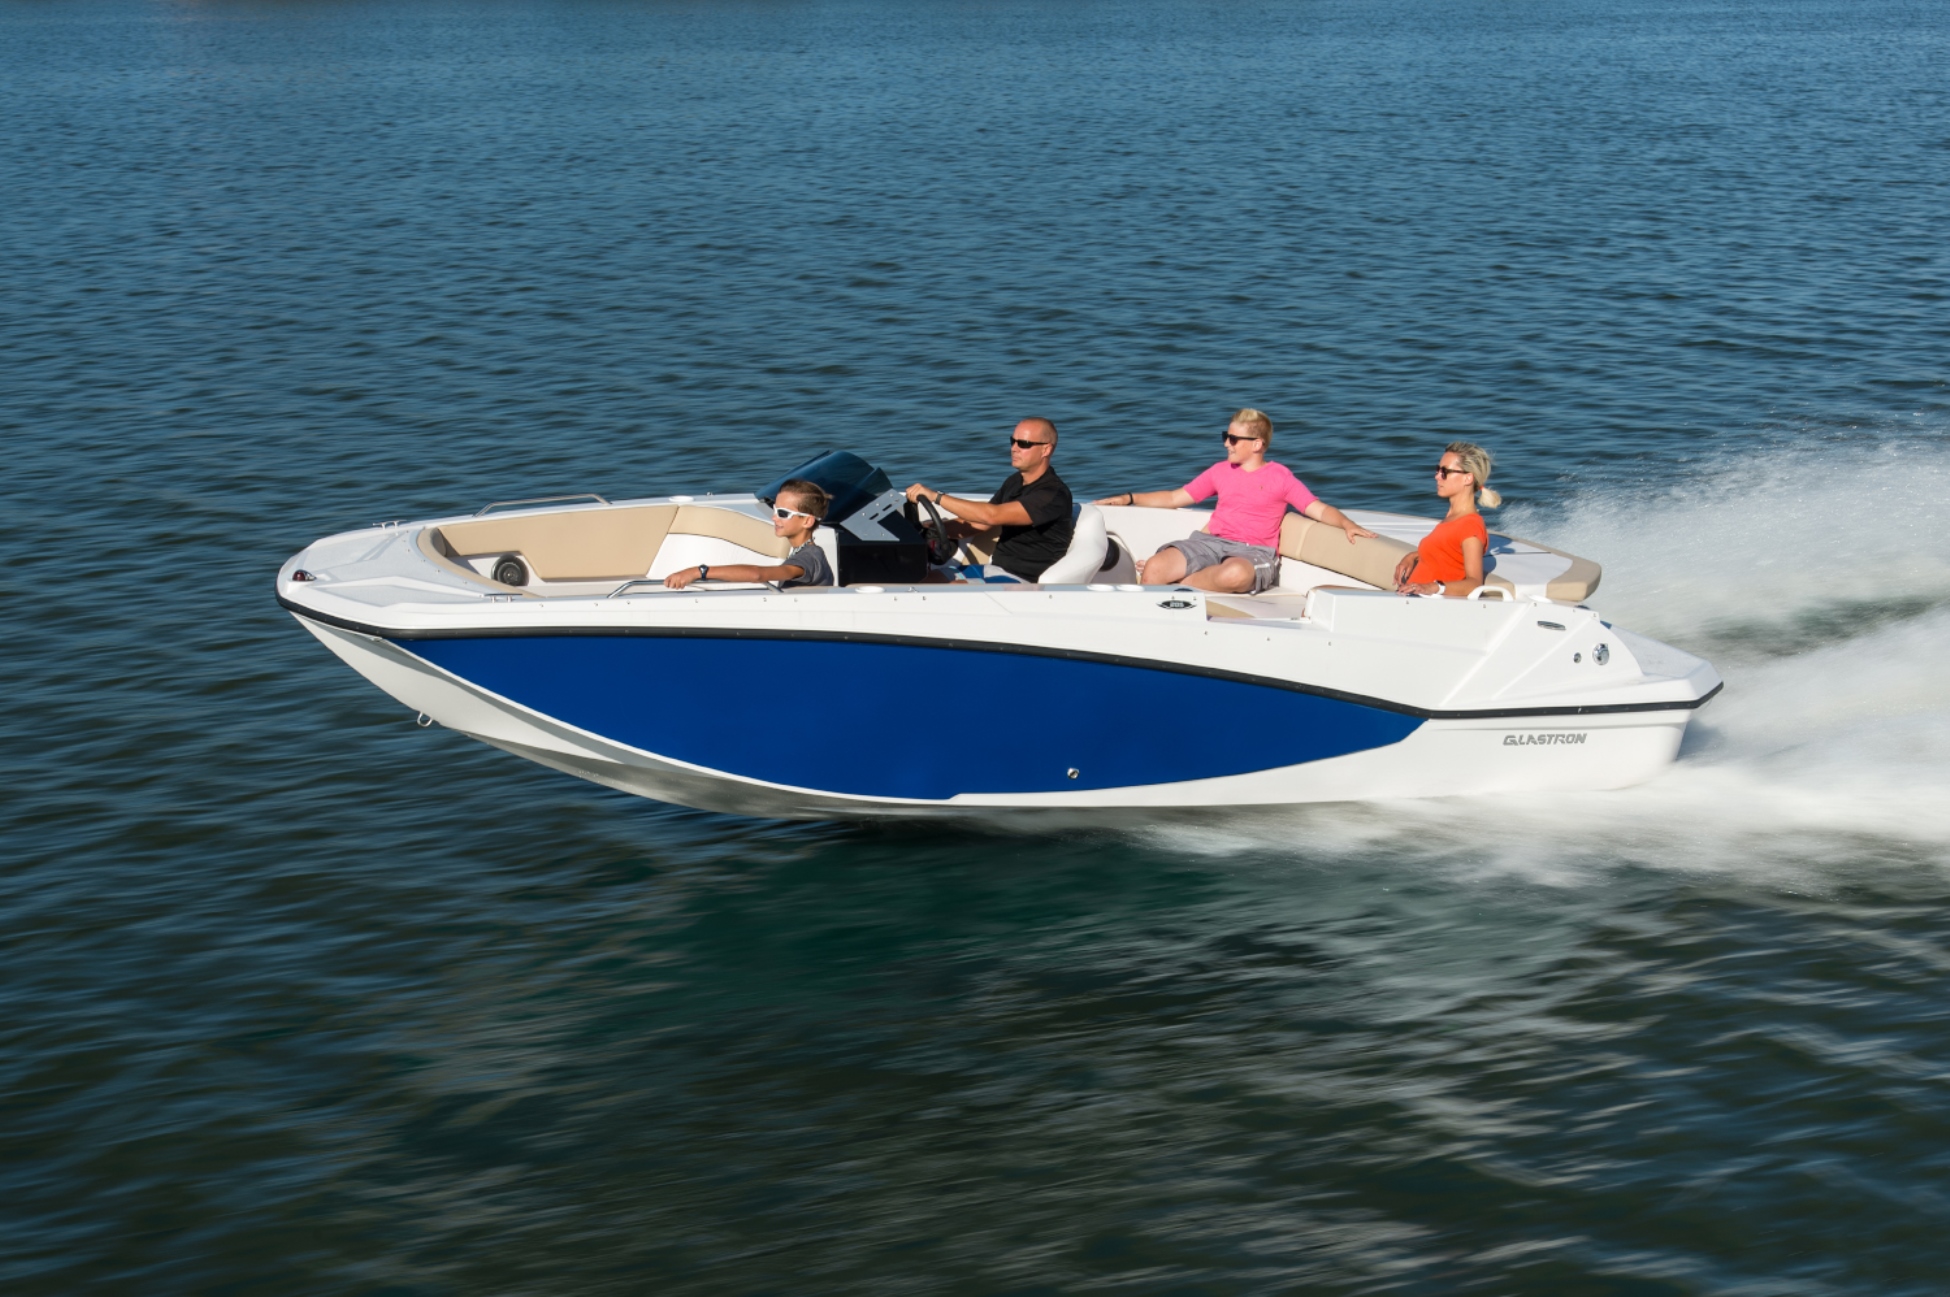 Glastron GTDX 205: Prices, Specs, Reviews and Sales Information - itBoat